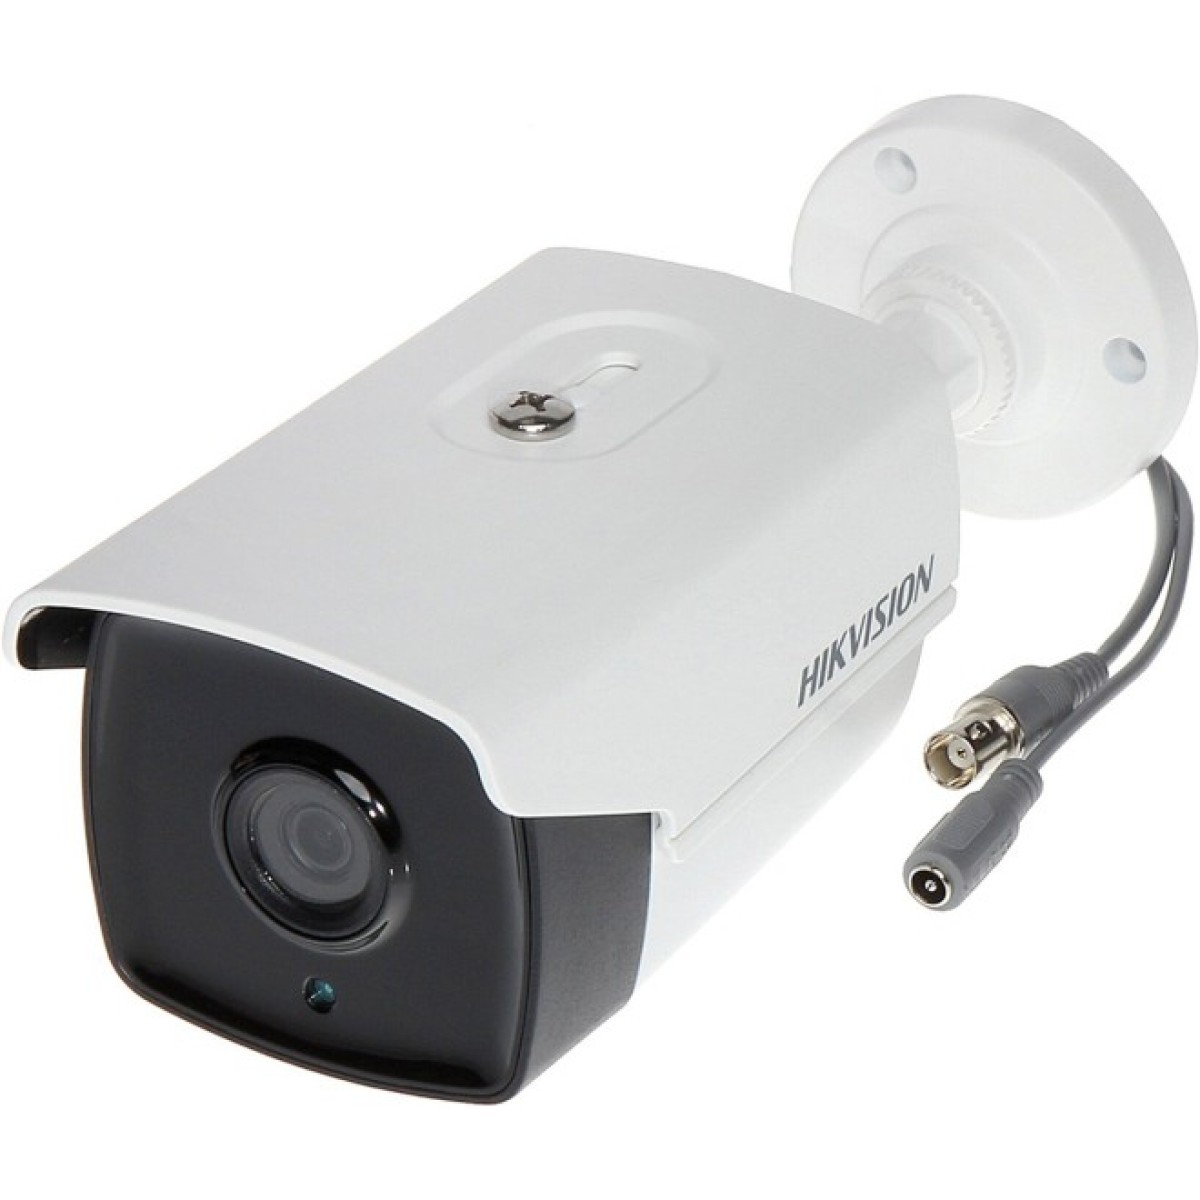 Камера Hikvision DS-2CE16H0T-IT5E (3.6) 98_98.jpg - фото 3